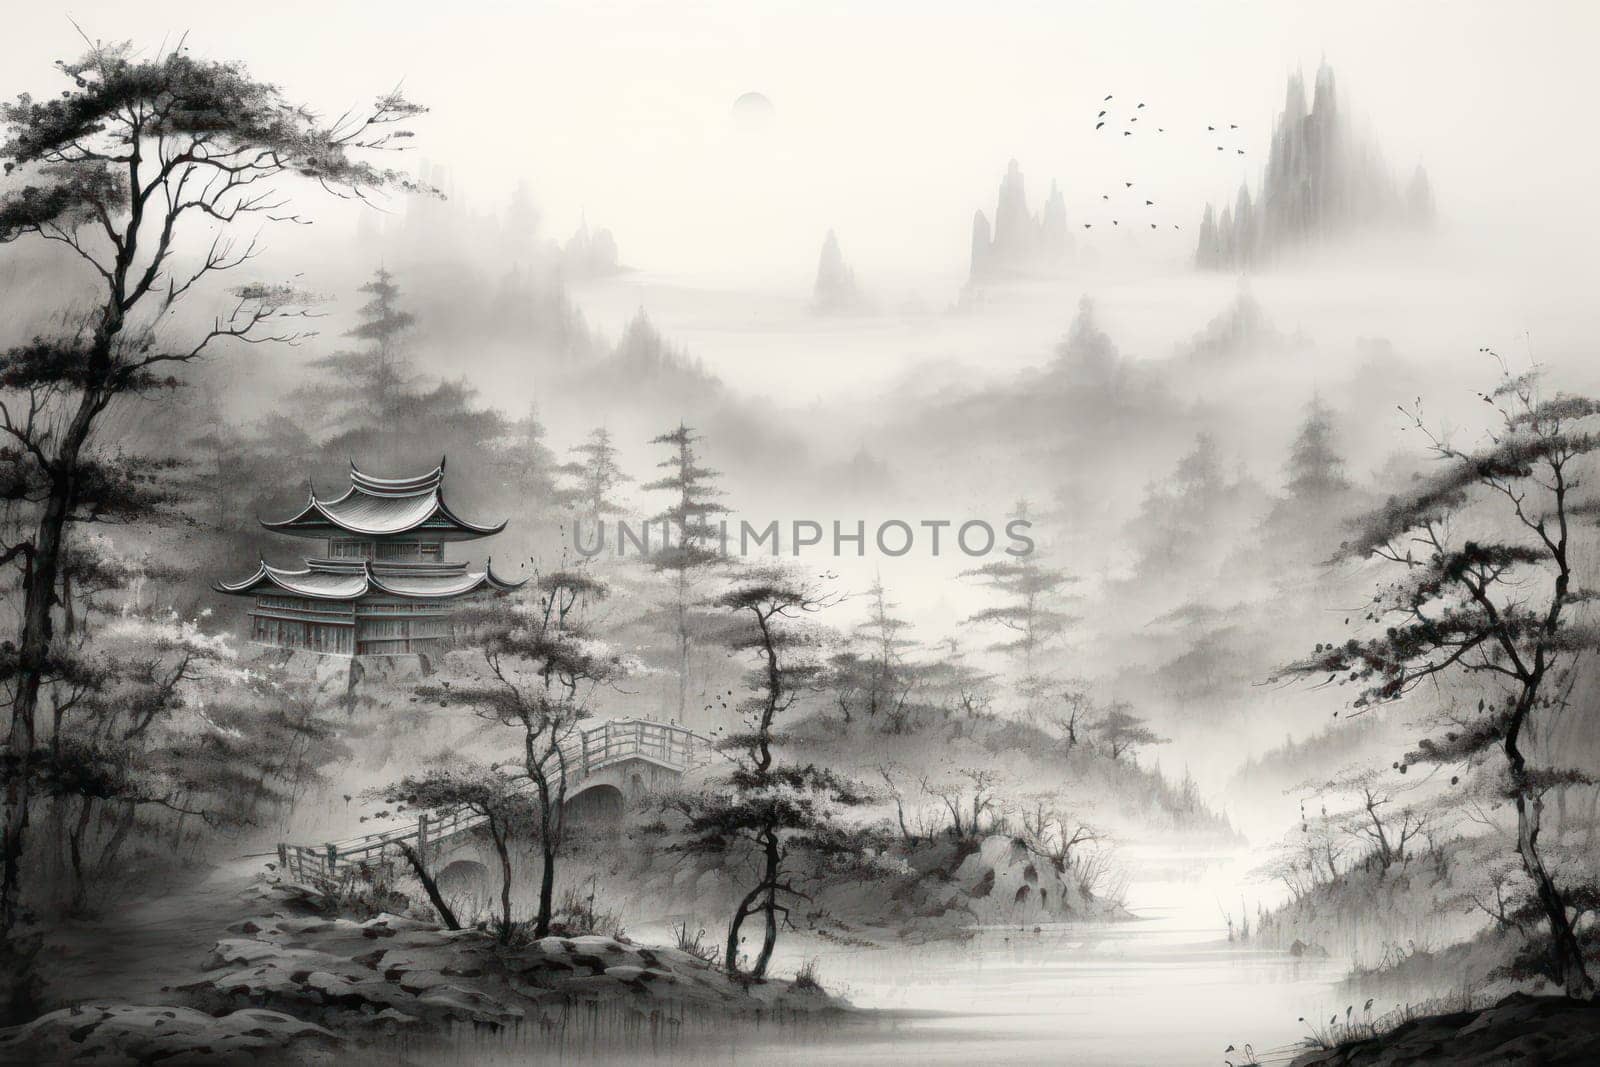 A captivating visual representation of the winter ambiance, focusing on the enigmatic allure of fog and mist enveloping the landscape, especially near bodies of water.